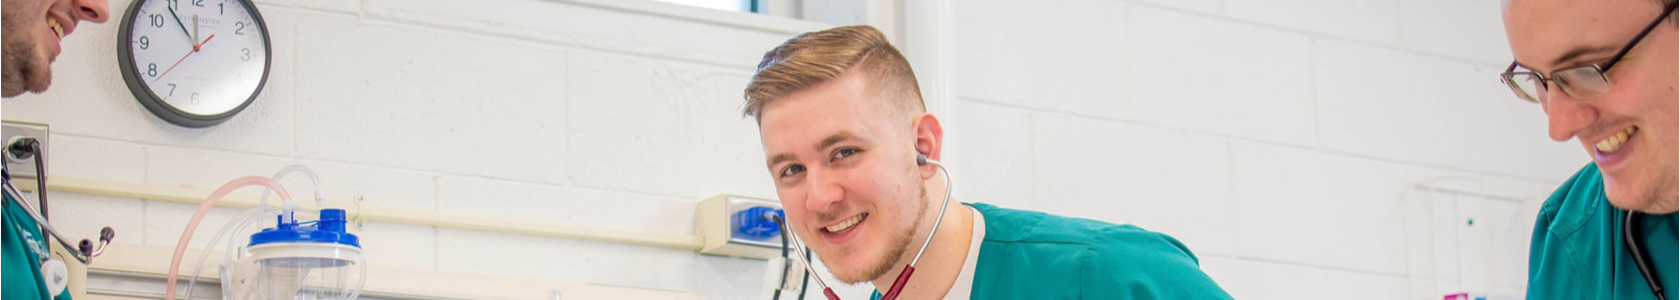 Male nursing student in green scrubs using stethoscope in simulation lab.